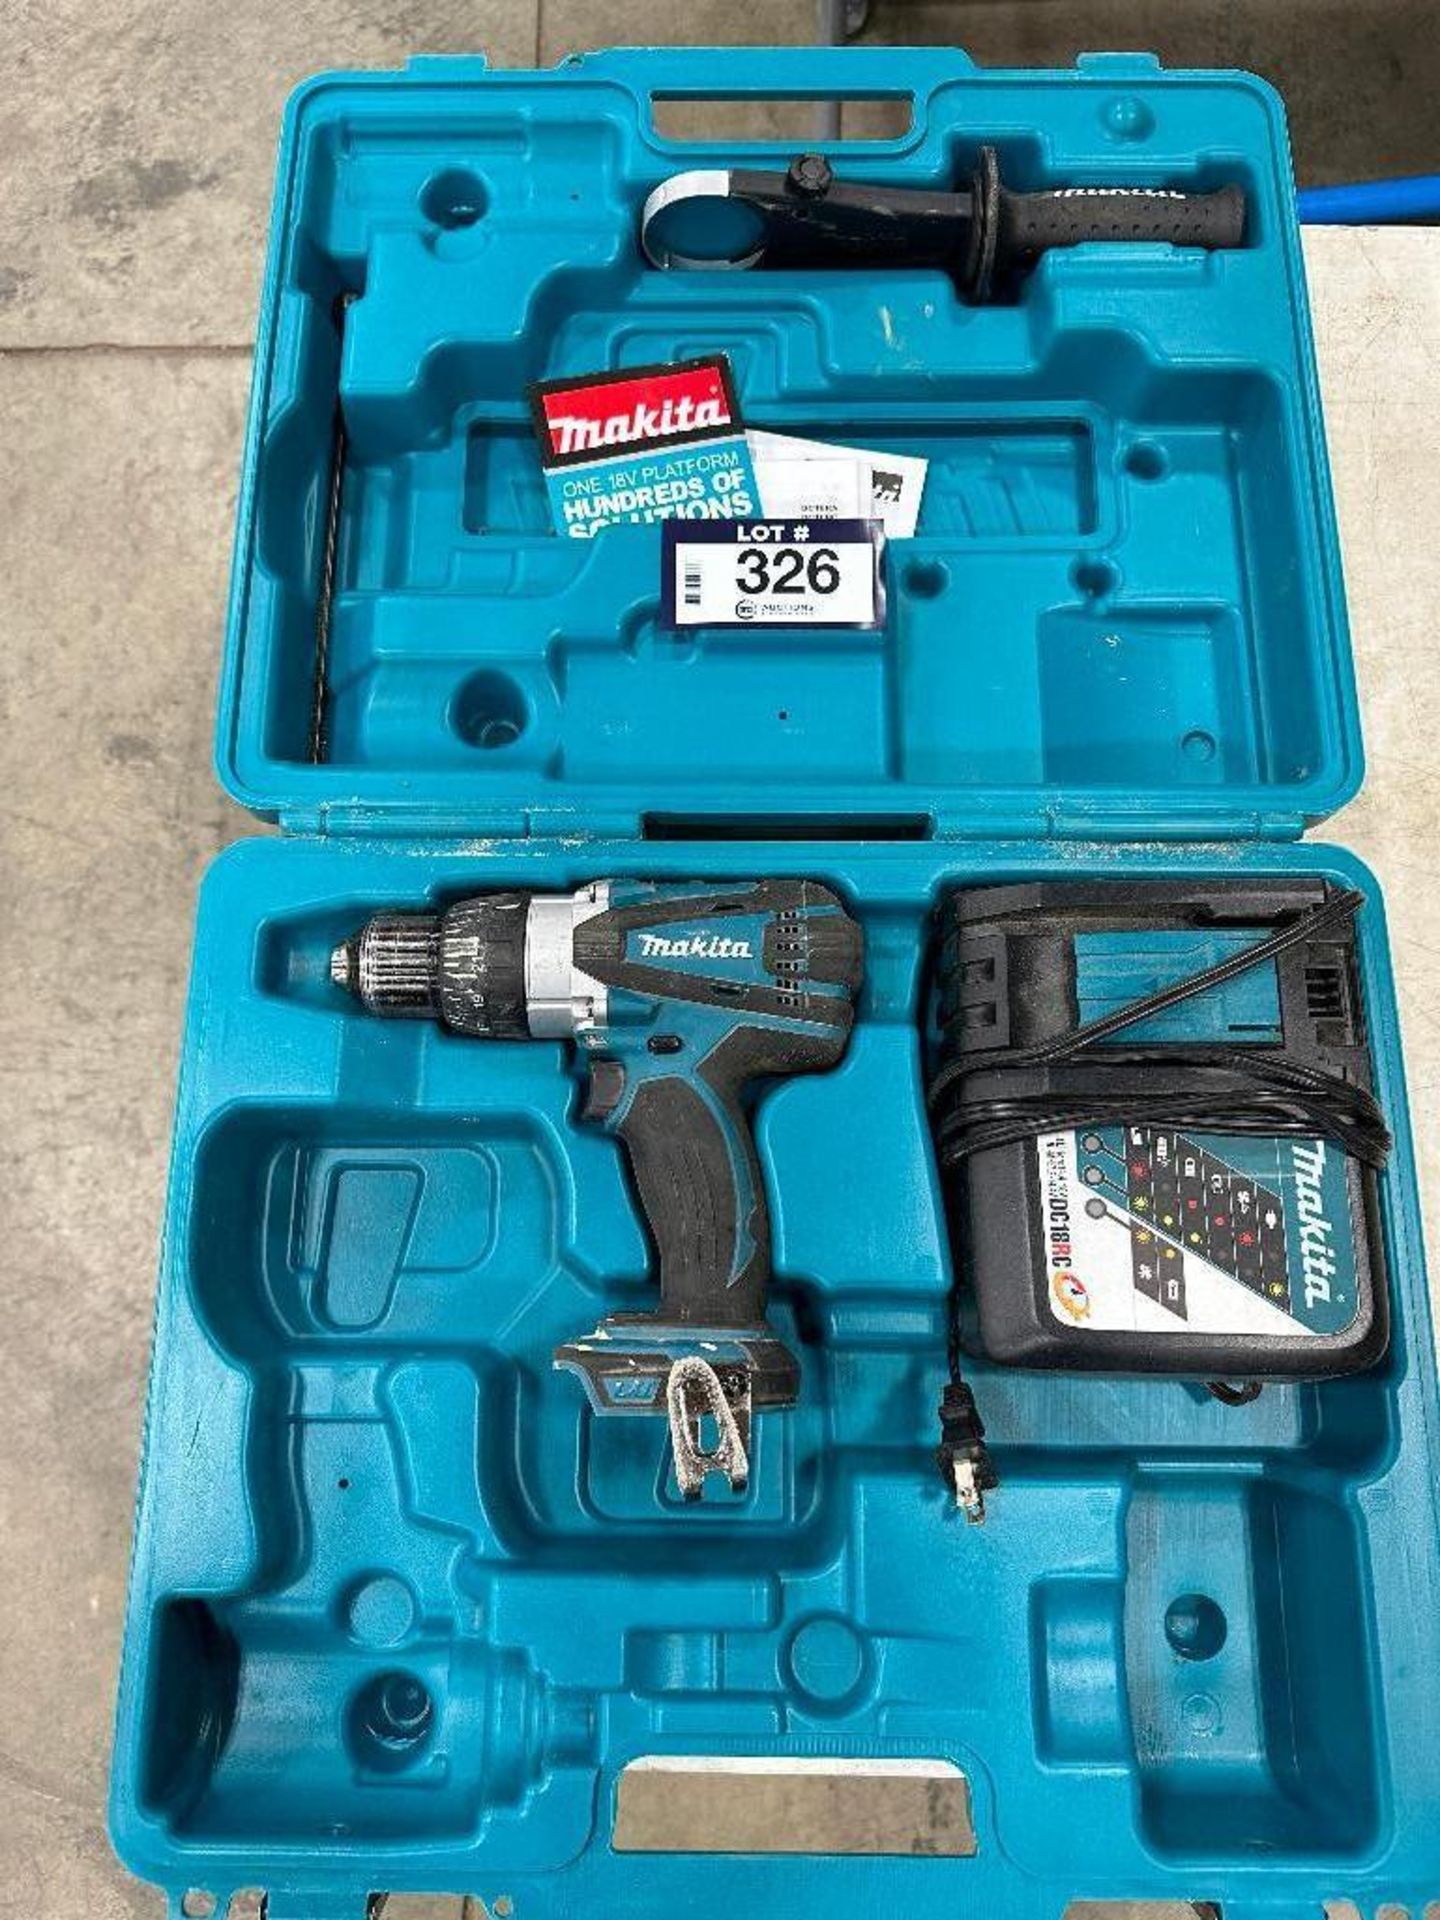 Makita DHP458 Cordless Drill w/ Battery Charger and Case - Image 3 of 5